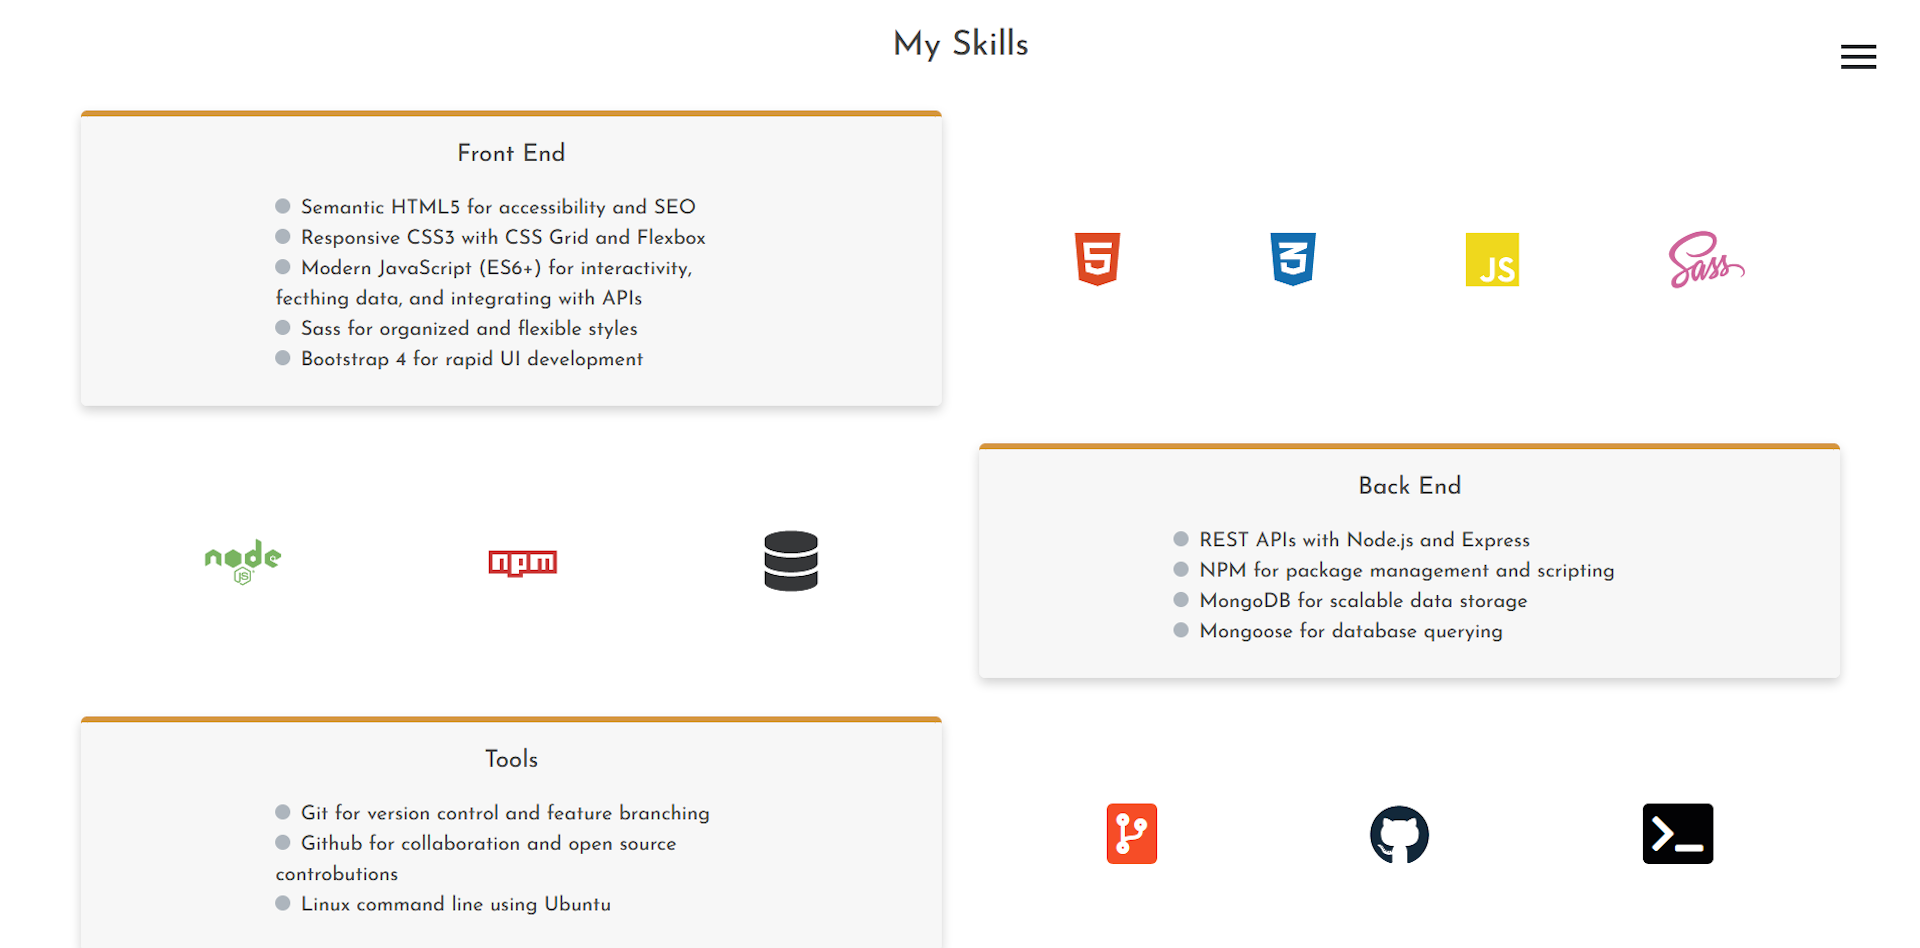 Screenshot of skills section from old site